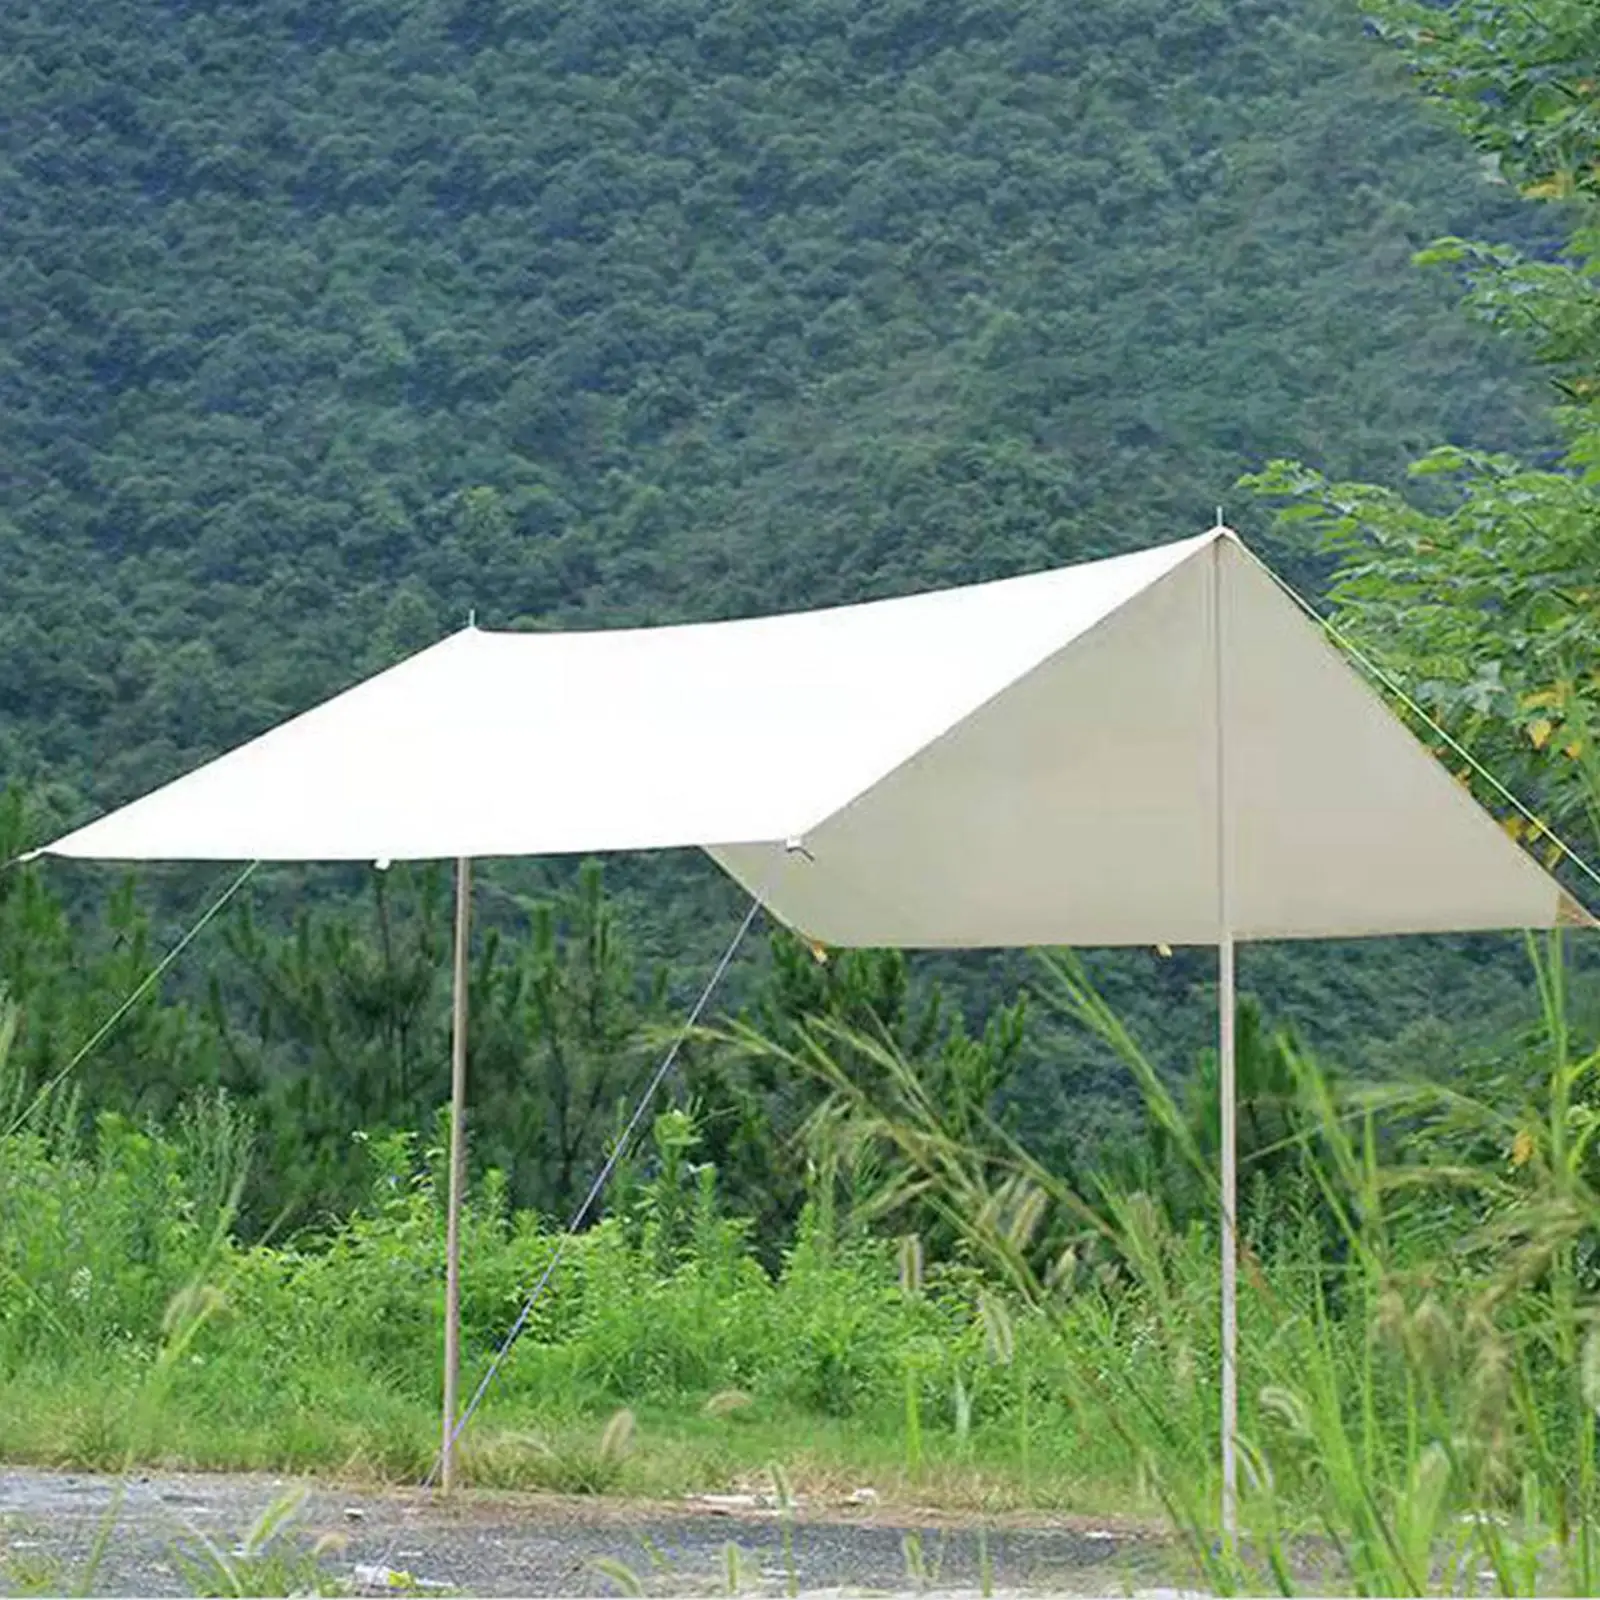 Portable Camping Tent Tarp Sun Shelter Awning Rainproof Sun Protection Waterproof for Hiking Picnic Outdoor Travel